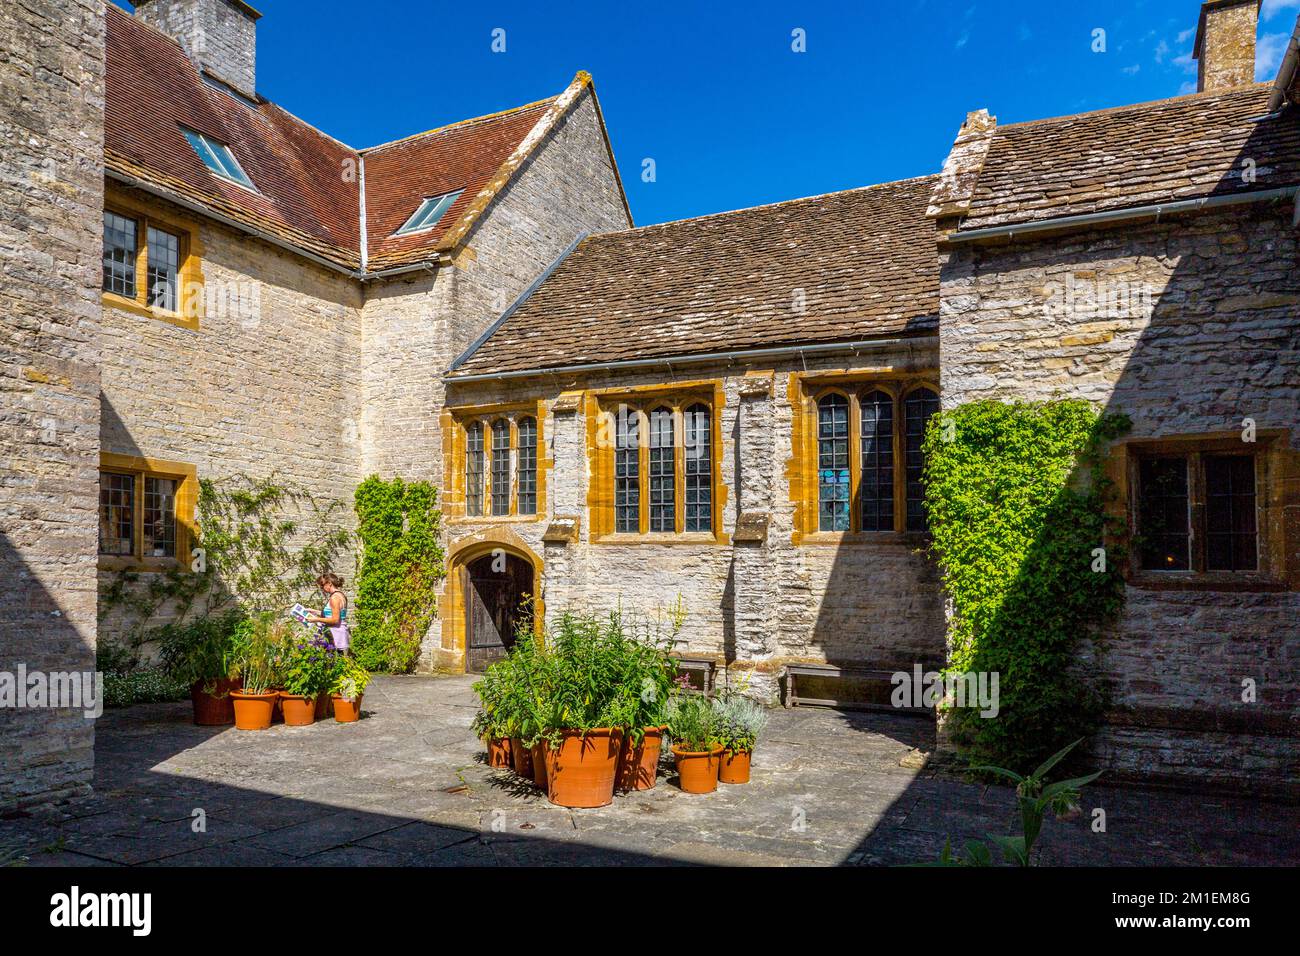 The central courtyard at Lytes Cary Manor, nr Somerton, Somerset, England, UK Stock Photo